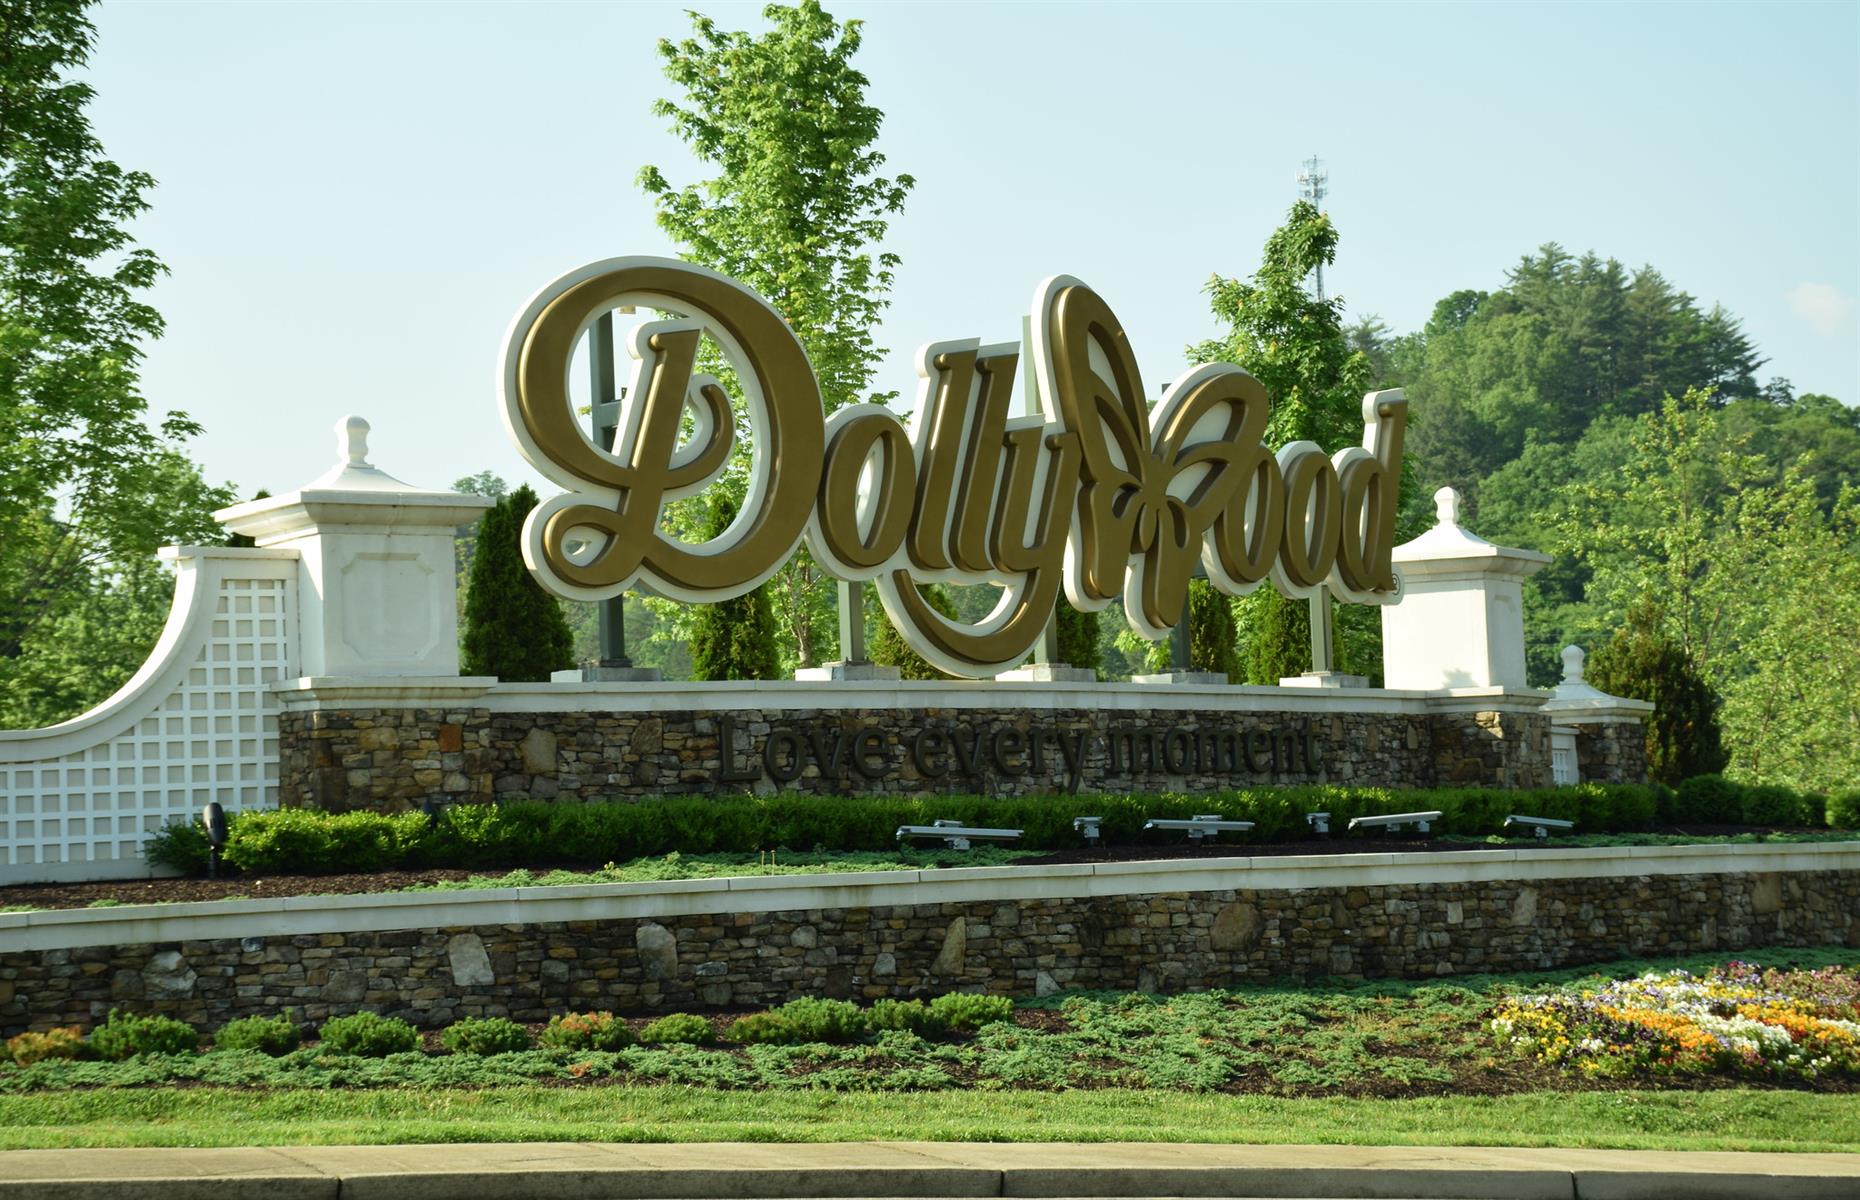 Silver Dollar City in Pigeon Forge was rebranded as Dollywood in 1986 after Tennessee native and superstar Dolly Parton joined the Herschend brothers in the theme park business. It drew 1.3 million visitors on opening – a 75% increase on Silver Dollar City's last season in 1985 – and included a new area called Rivertown Junction, with a replica of Dolly’s Locust Ridge childhood home. Dollywood became Tennessee's most-visited tourist attraction.